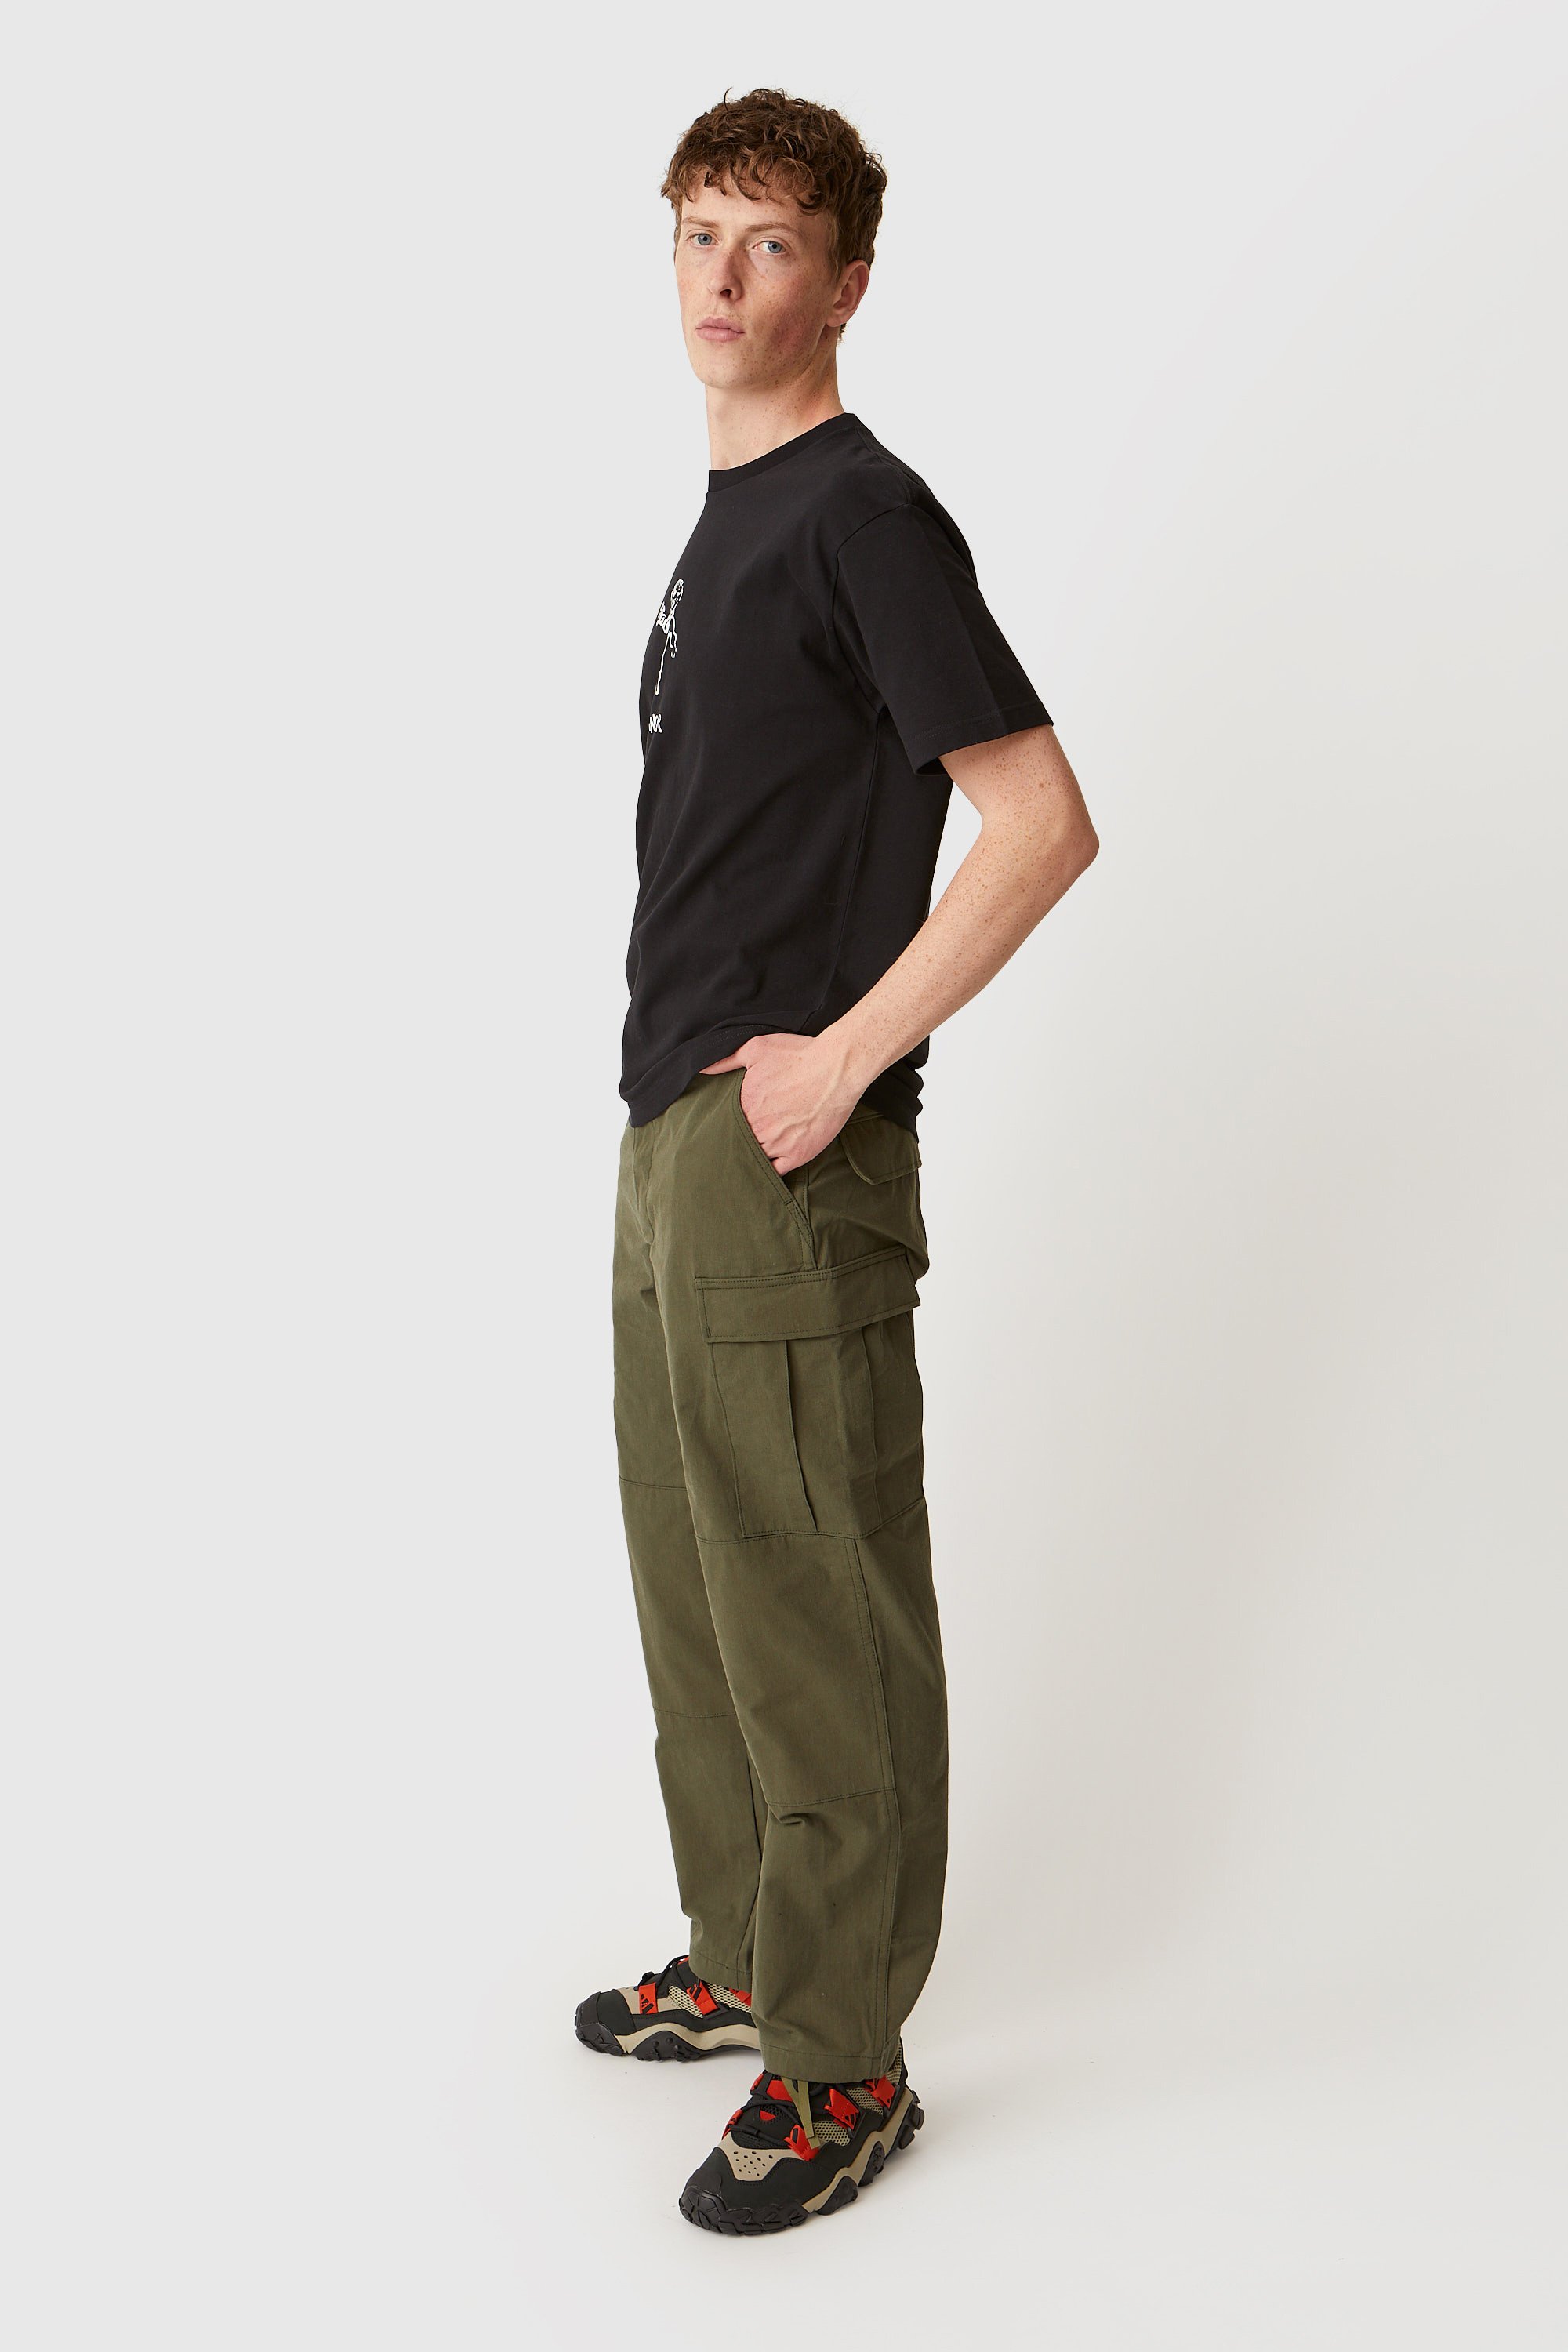 Wmill-Trousers 01 / Trousers